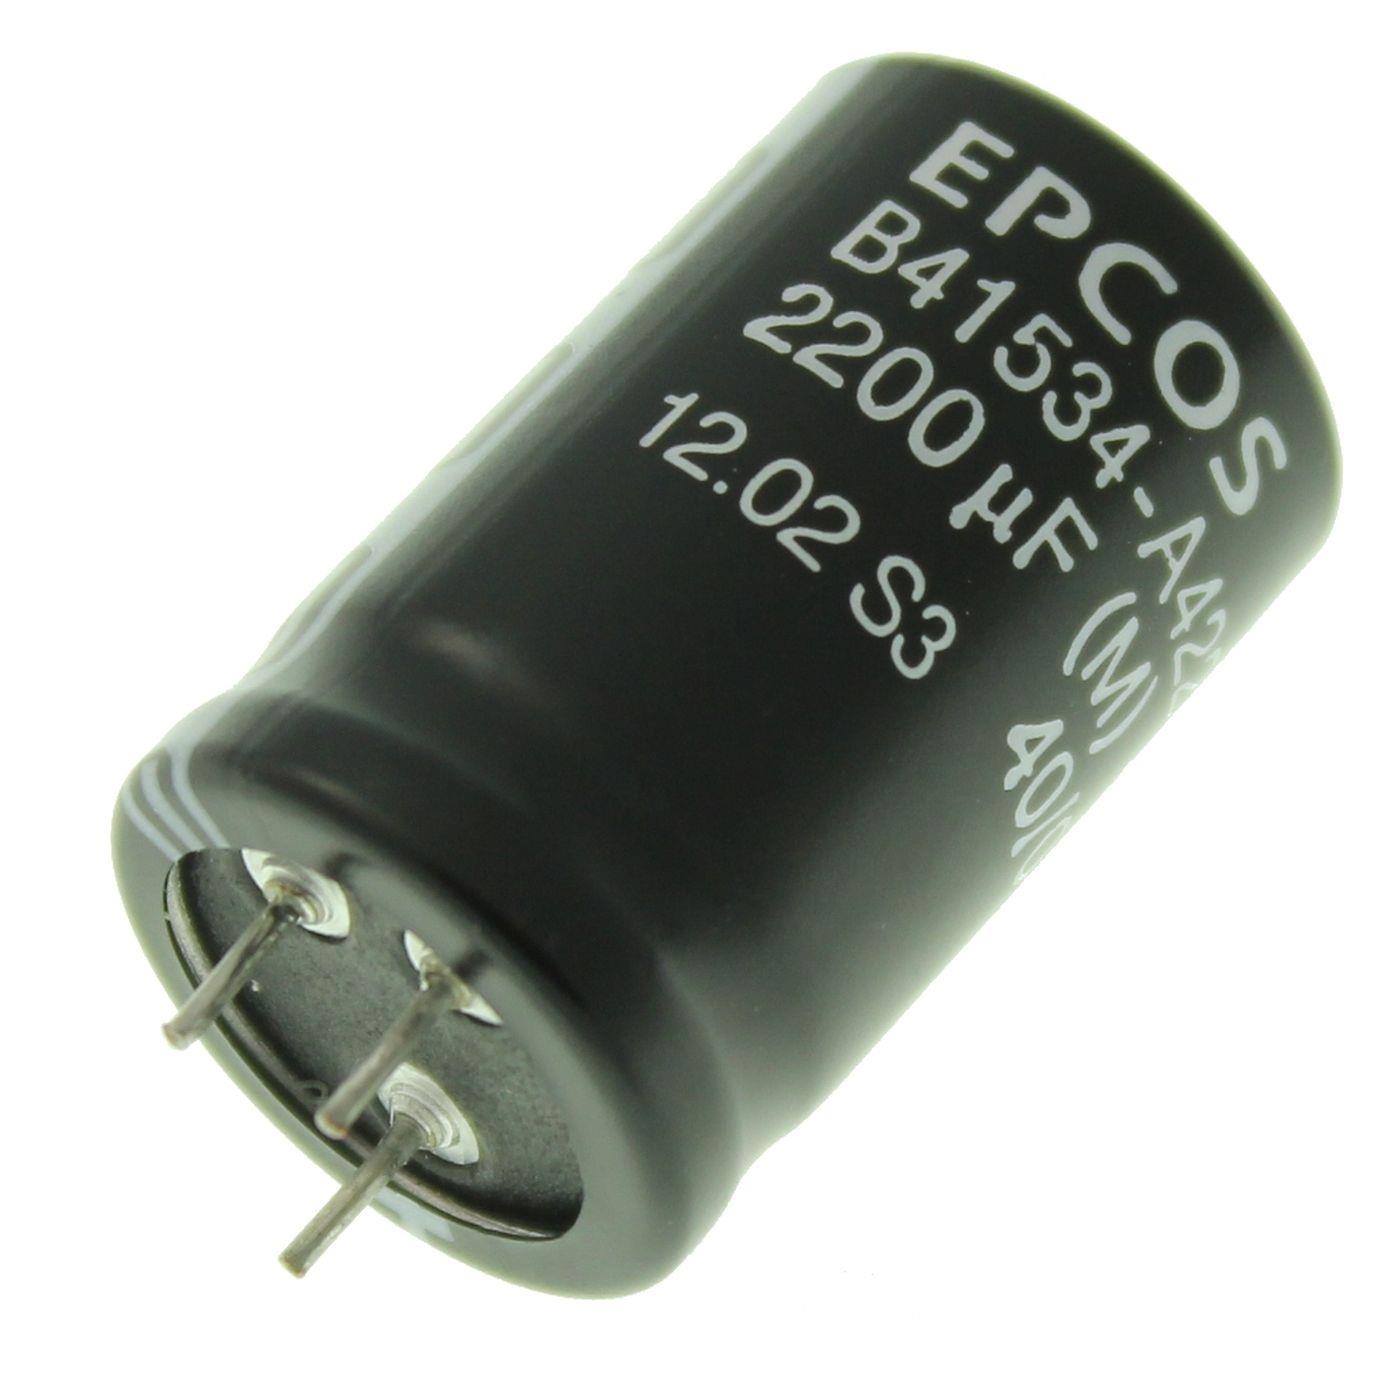 3-Pin Electrolytic capacitor Radial 2200µF 16V 85°C B41534A4228M d18x30mm 2200uF